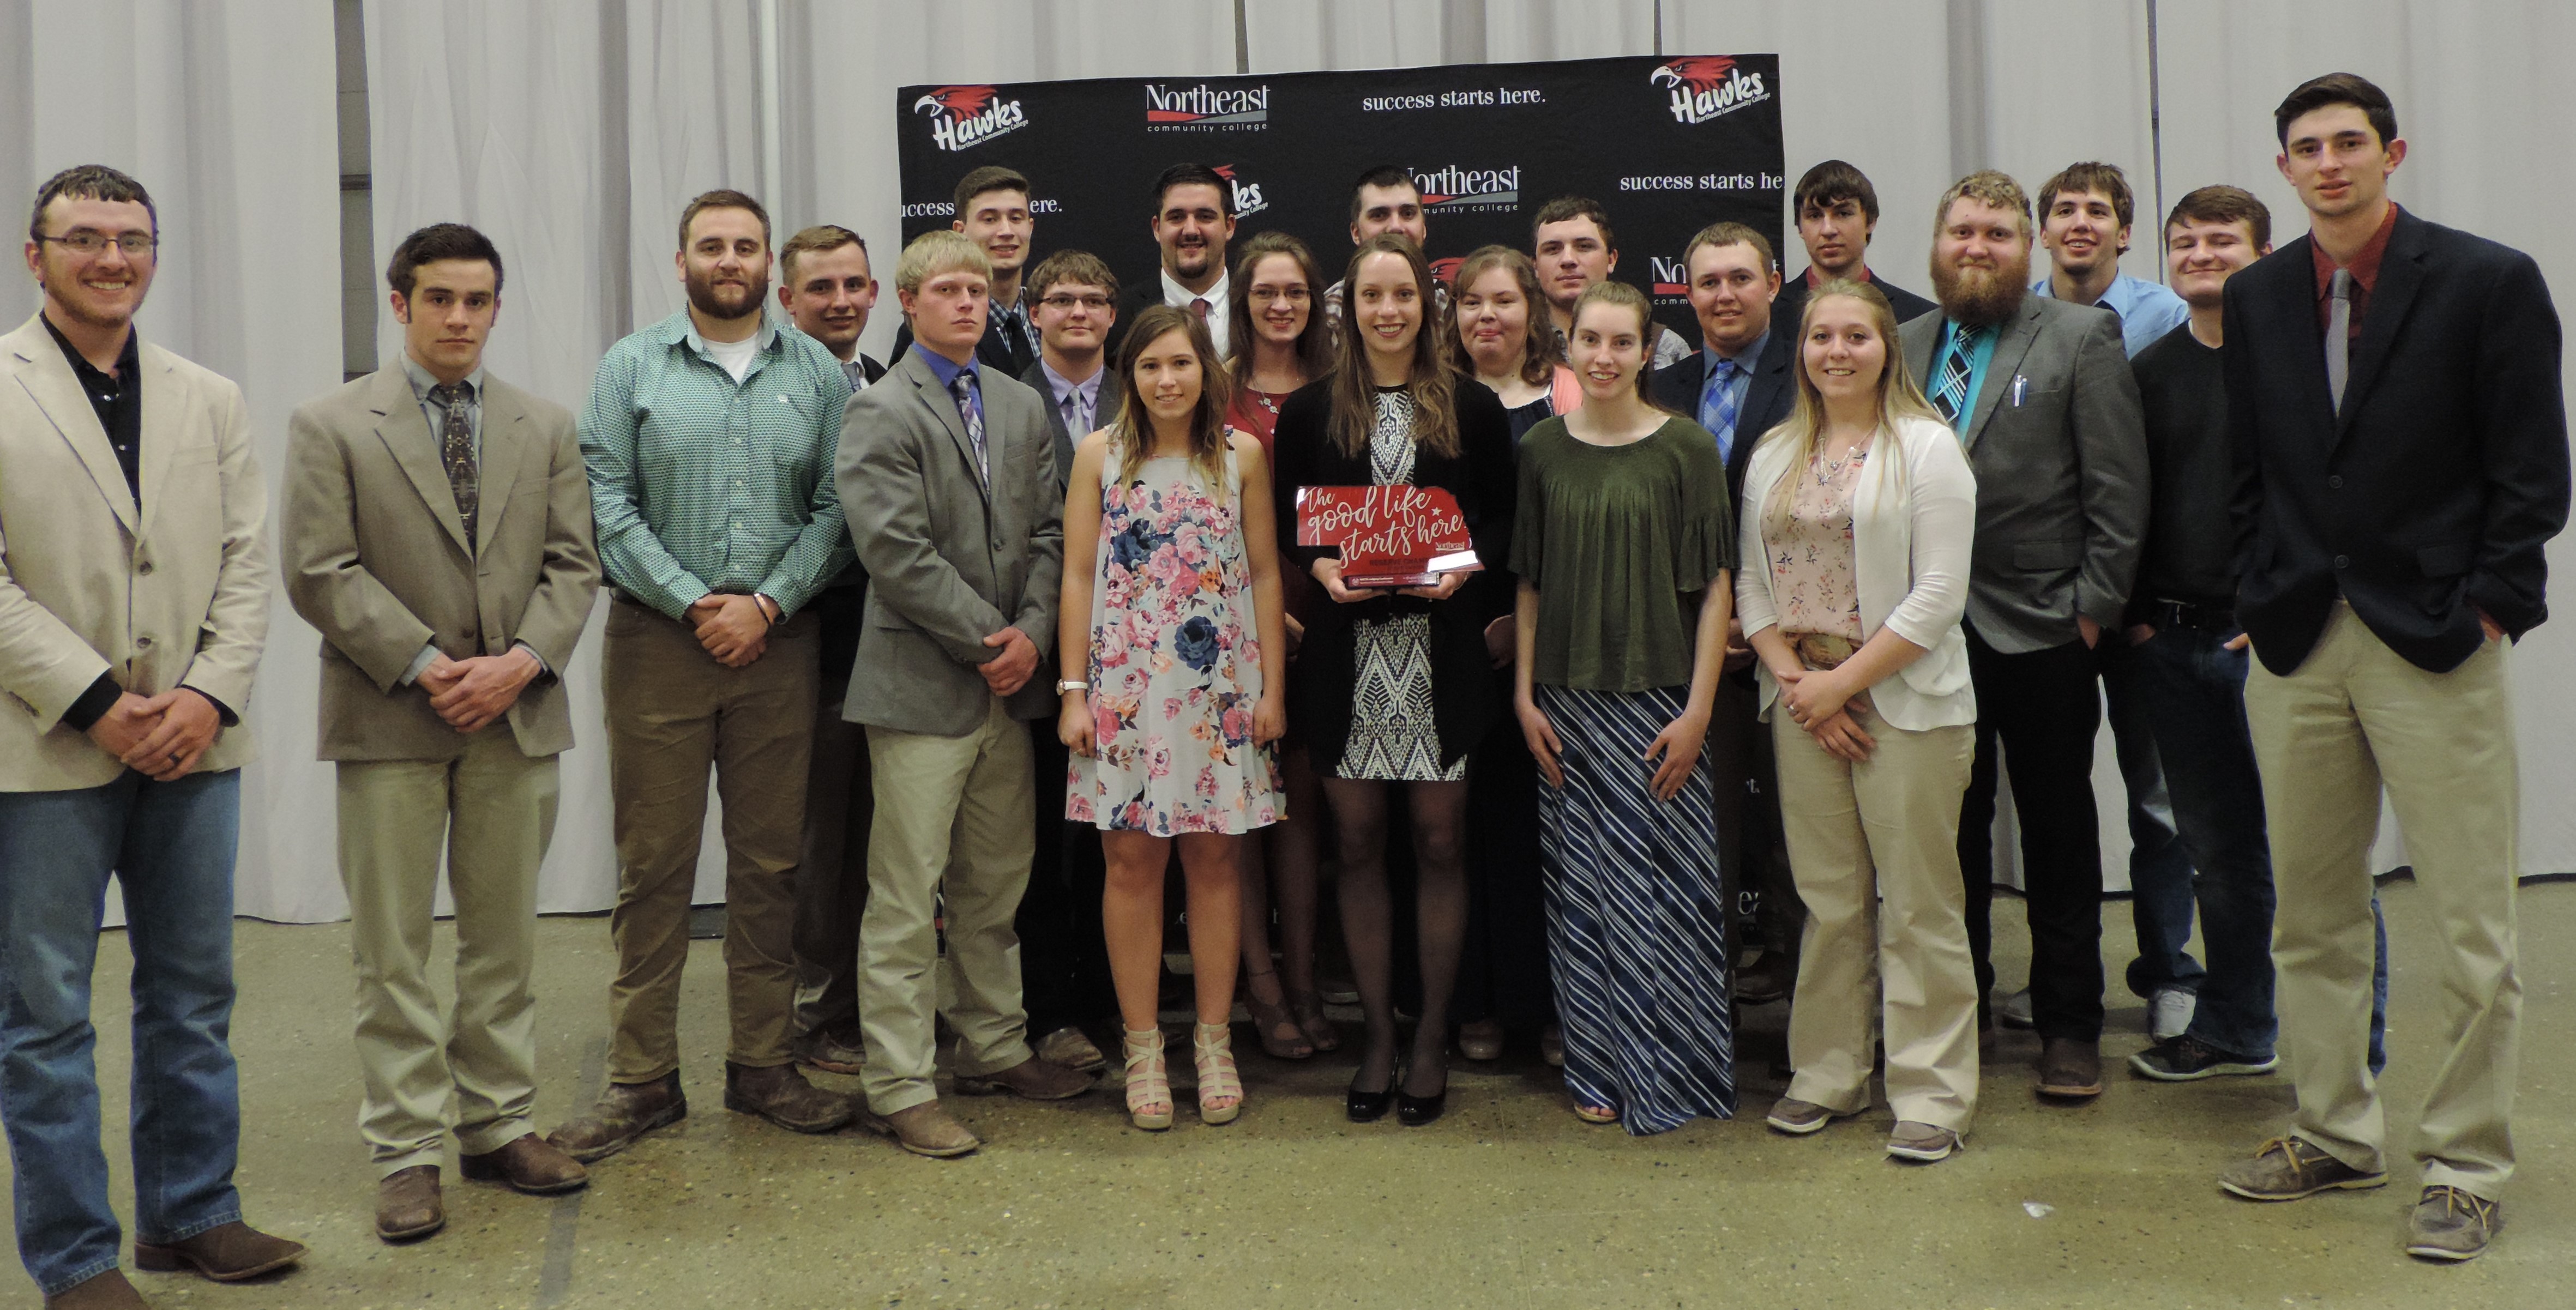 The Nebraska College of Technical Agriculture at Curtis is 2018 Reserve Champion Two-year College in the sweepstakes of 13 contests at the North American Colleges and Teachers of Agriculture conference in Norfolk, Nebraska April 19-21. (Photo by Mary Pat Hoag)